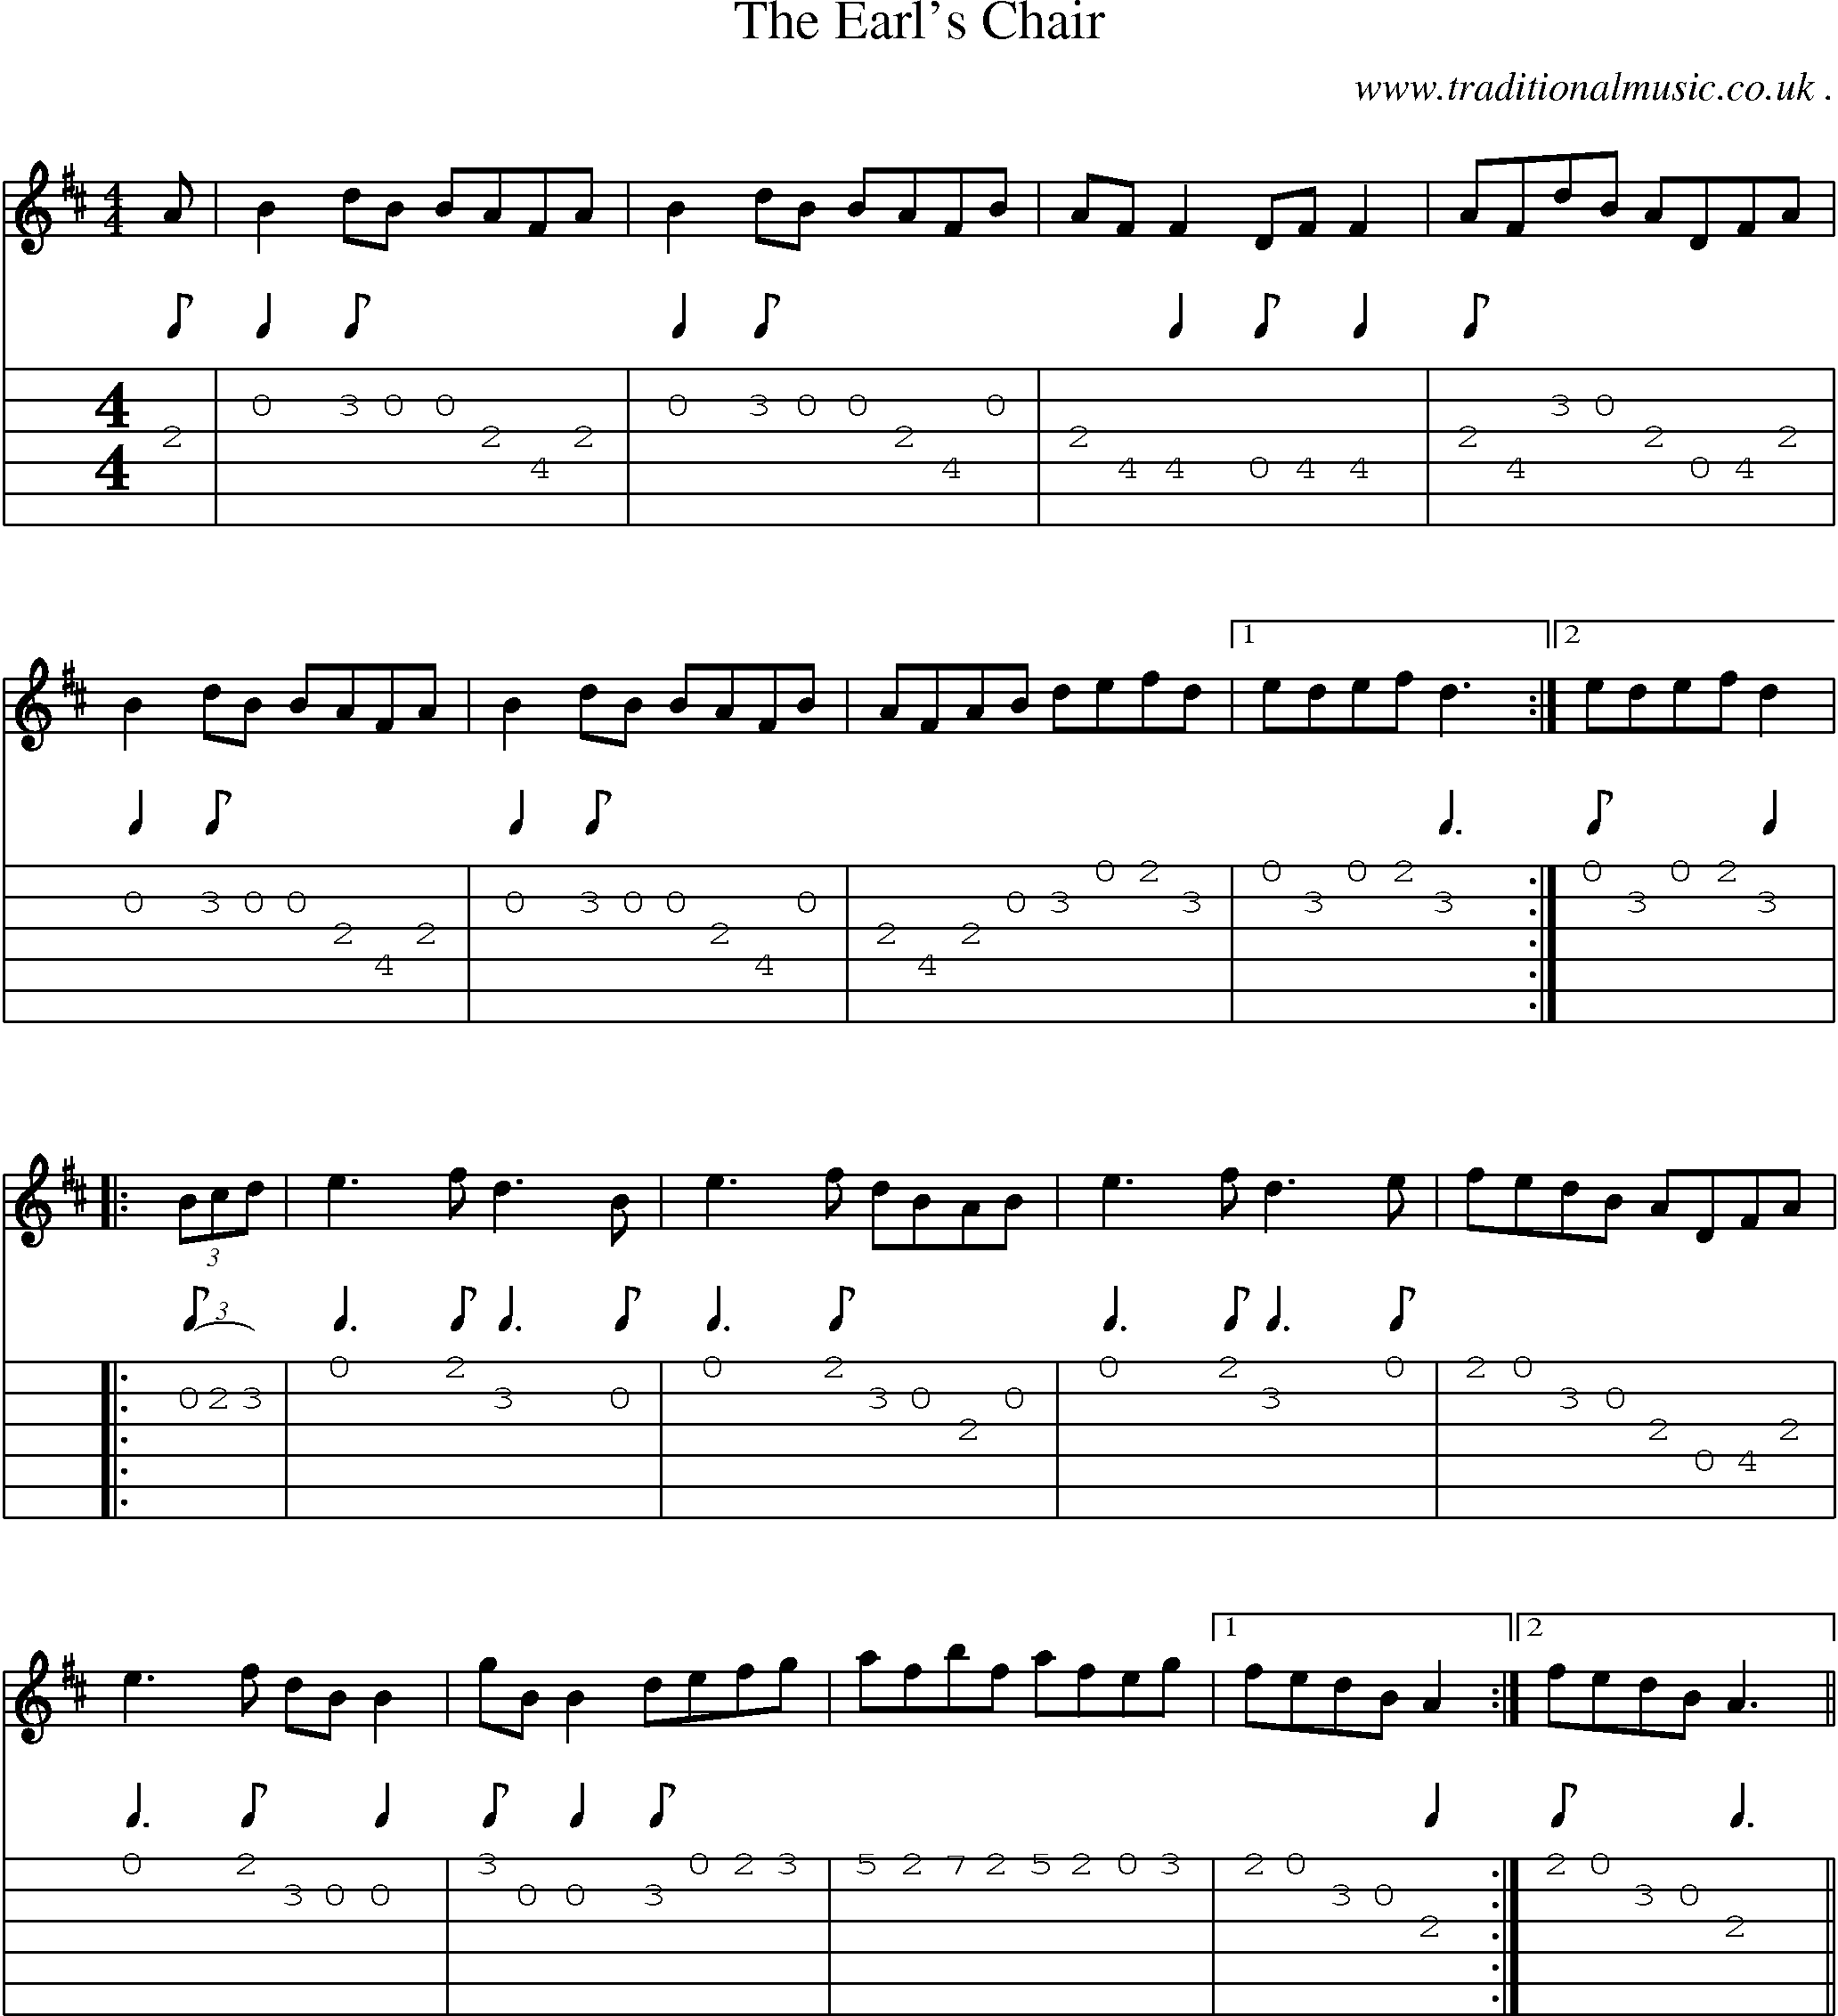 Sheet-Music and Guitar Tabs for The Earls Chair